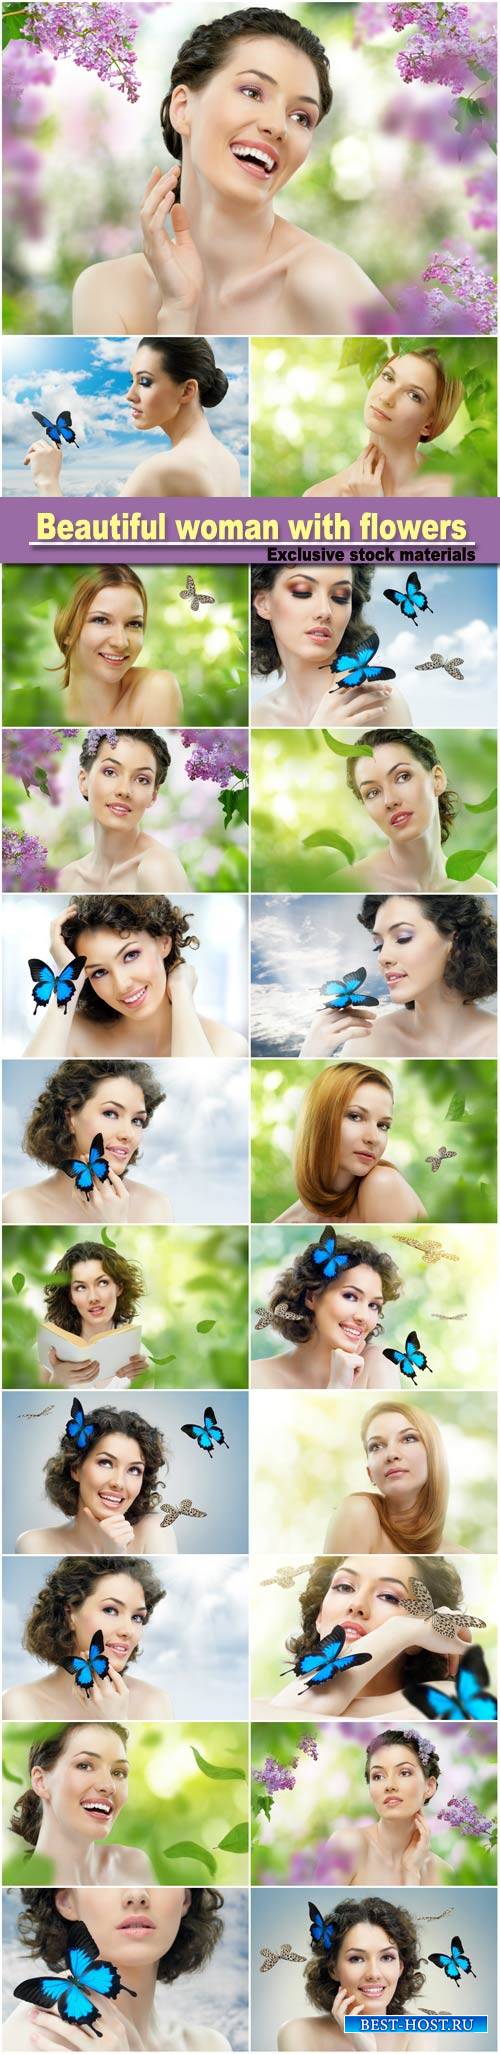 Beautiful woman with flowers and butterflies